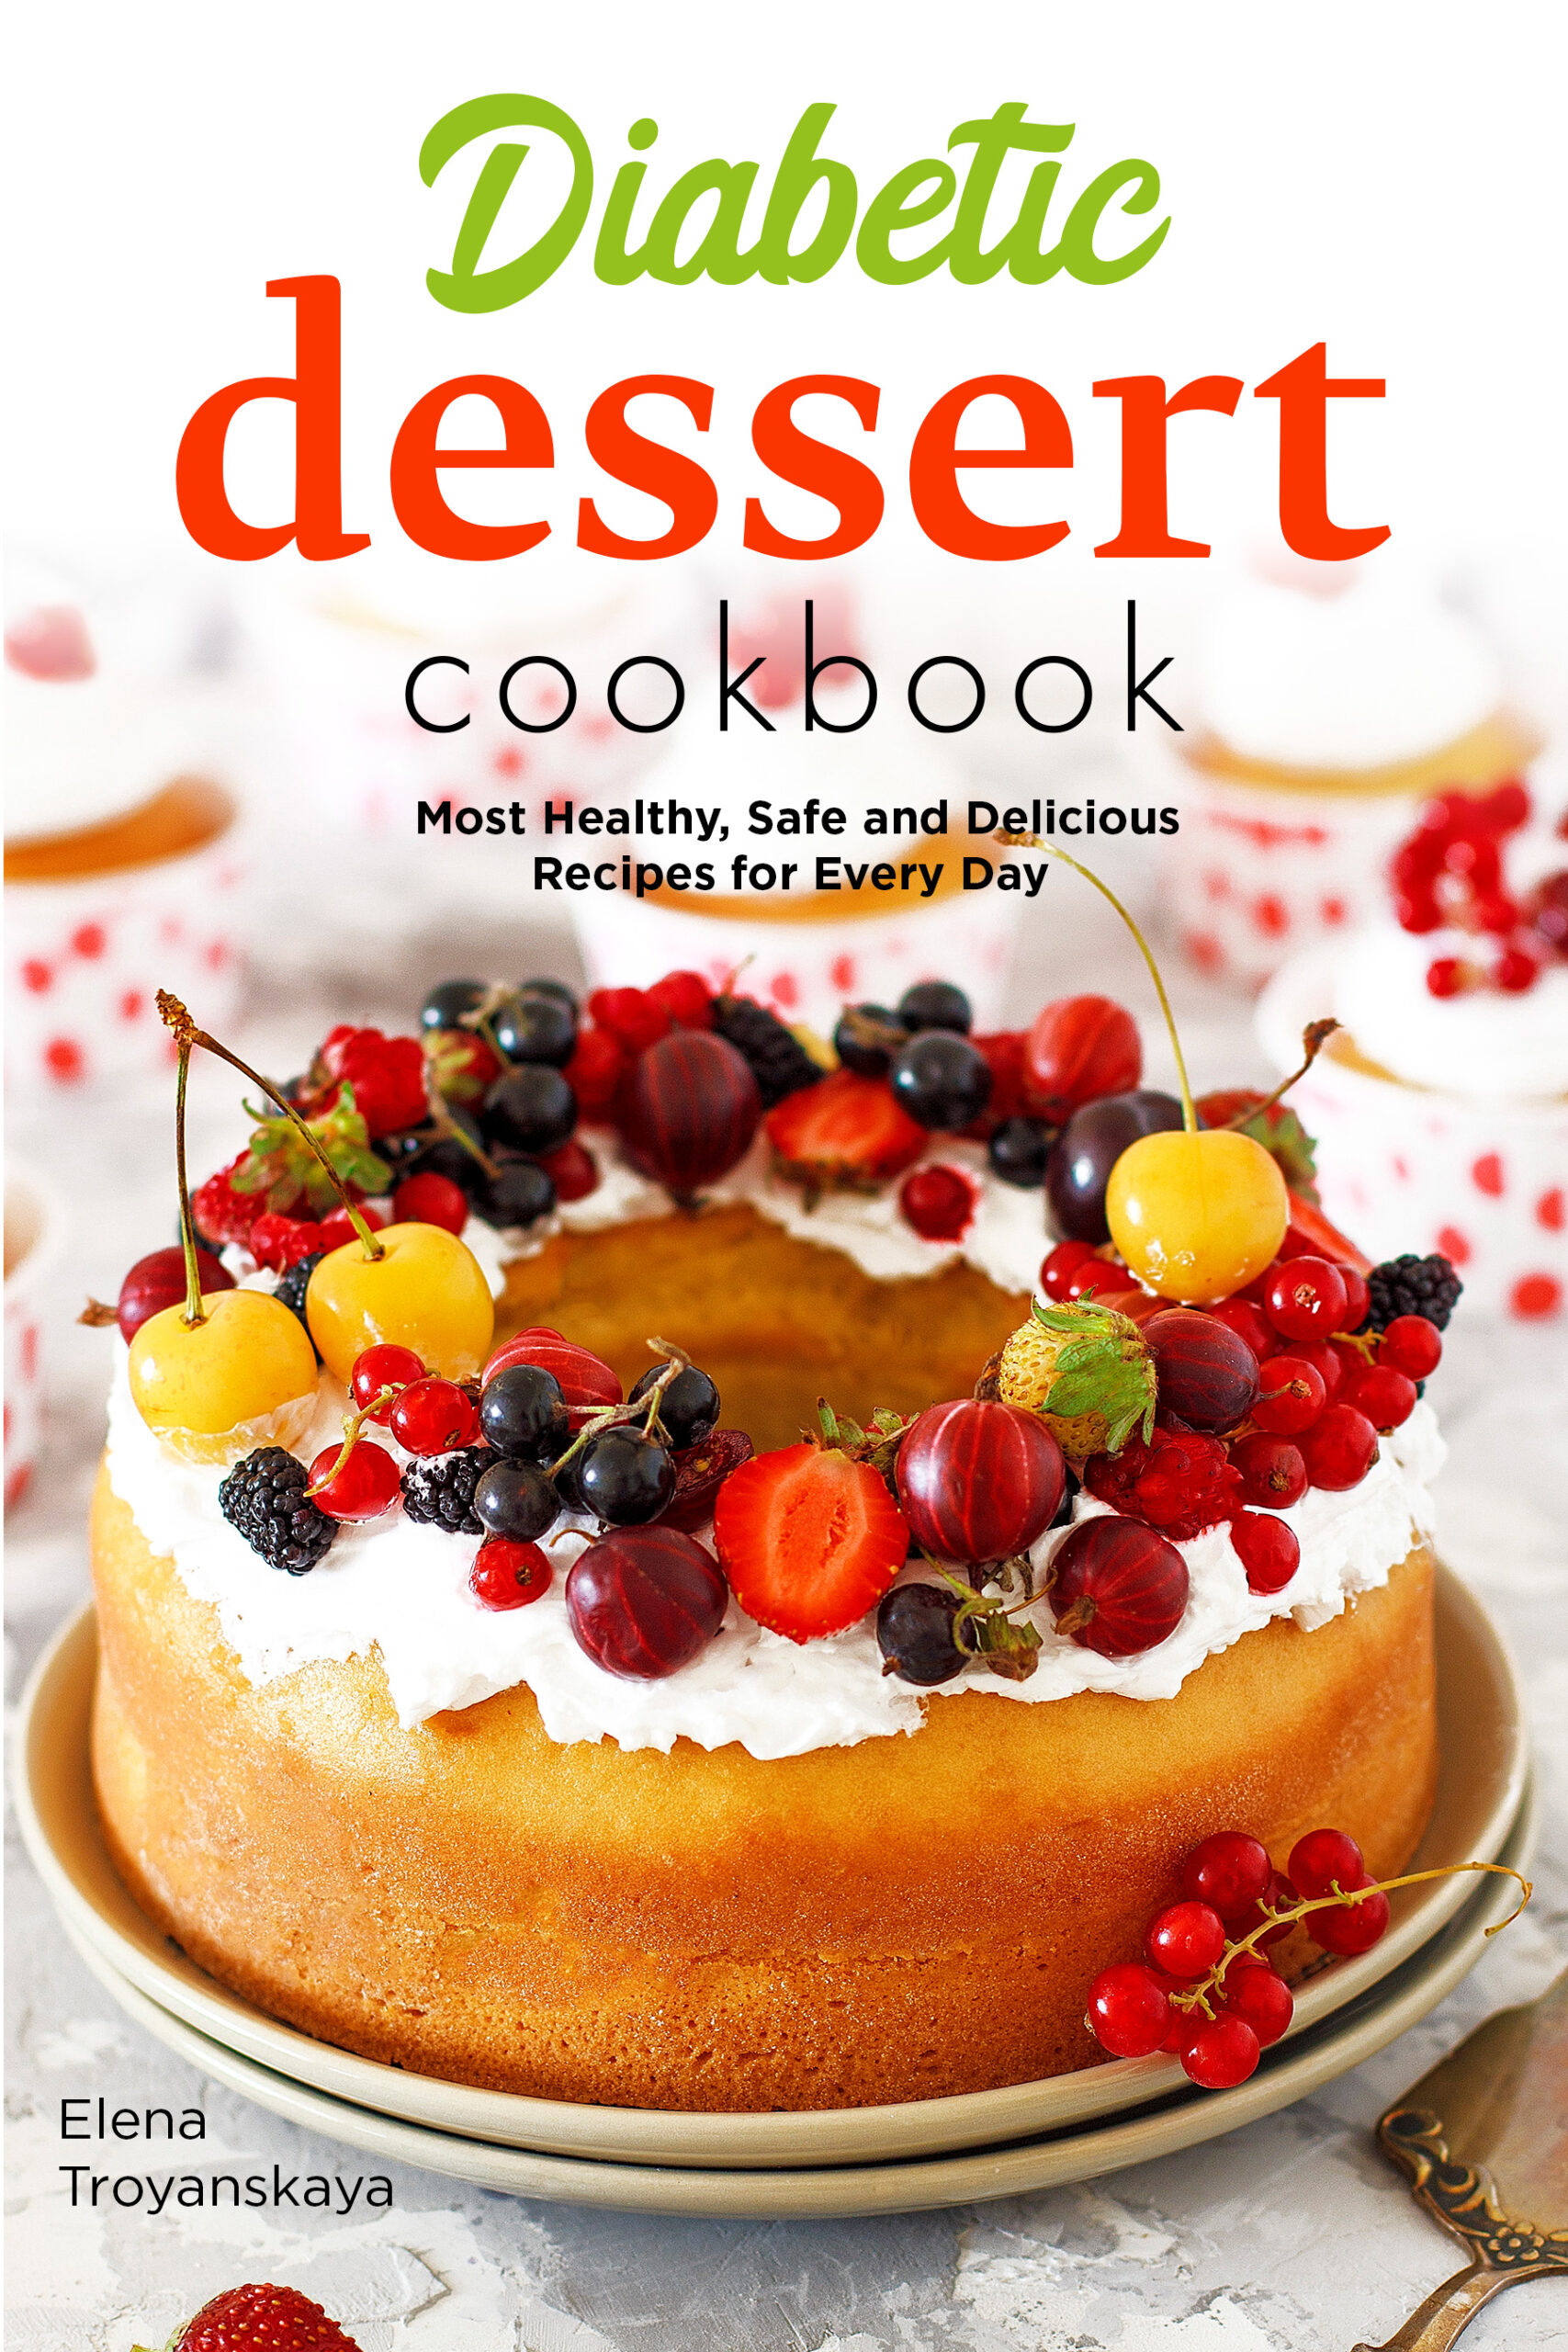 FREE: Diabetic Dessert Cookbook: Most Healthy, Safe and Delicious Recipes for Every Day by Elena Troyanskaya